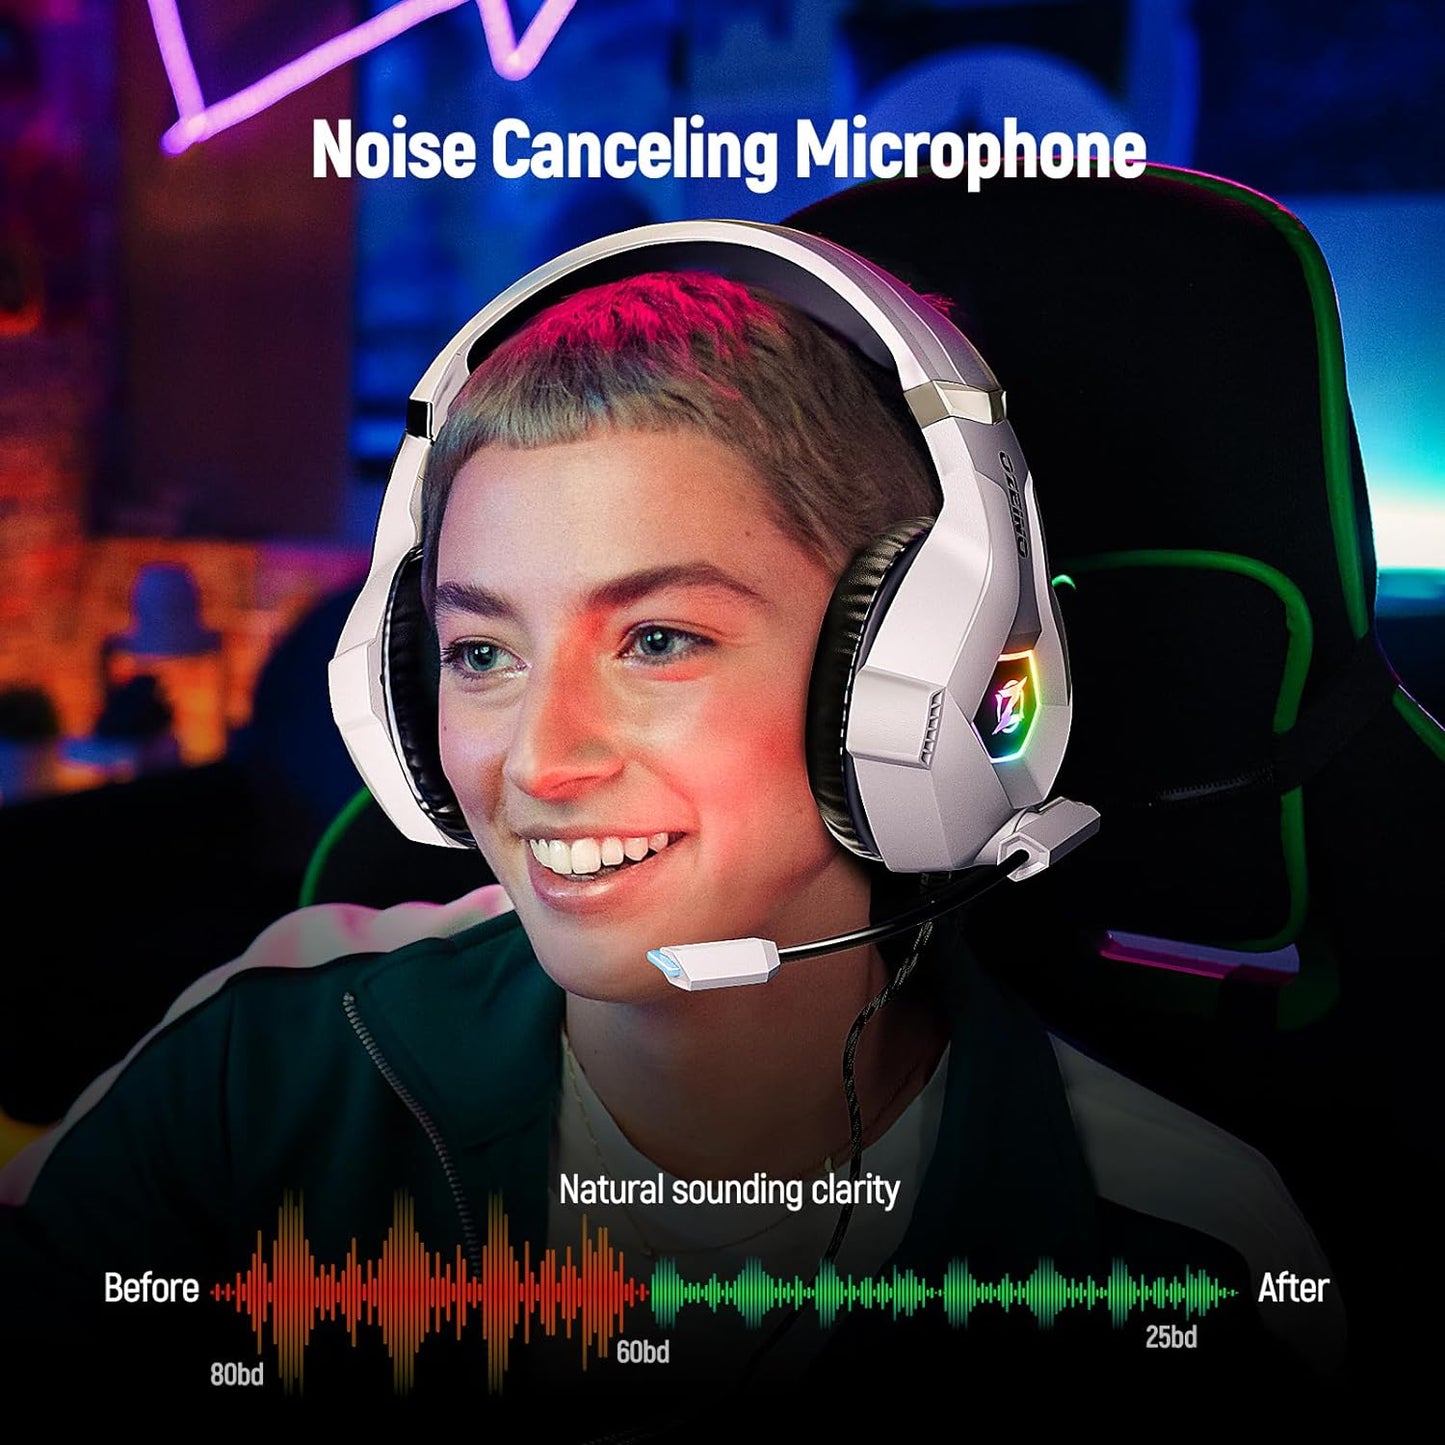 Ultimate Gaming Headset for PC, PS4, PS5 - Stereo Sound, Noise Cancelling Mic, Soft Memory Earmuffs, LED Lights - Compatible with Xbox Series X/S, Switch, Laptop, Mac-WHITE